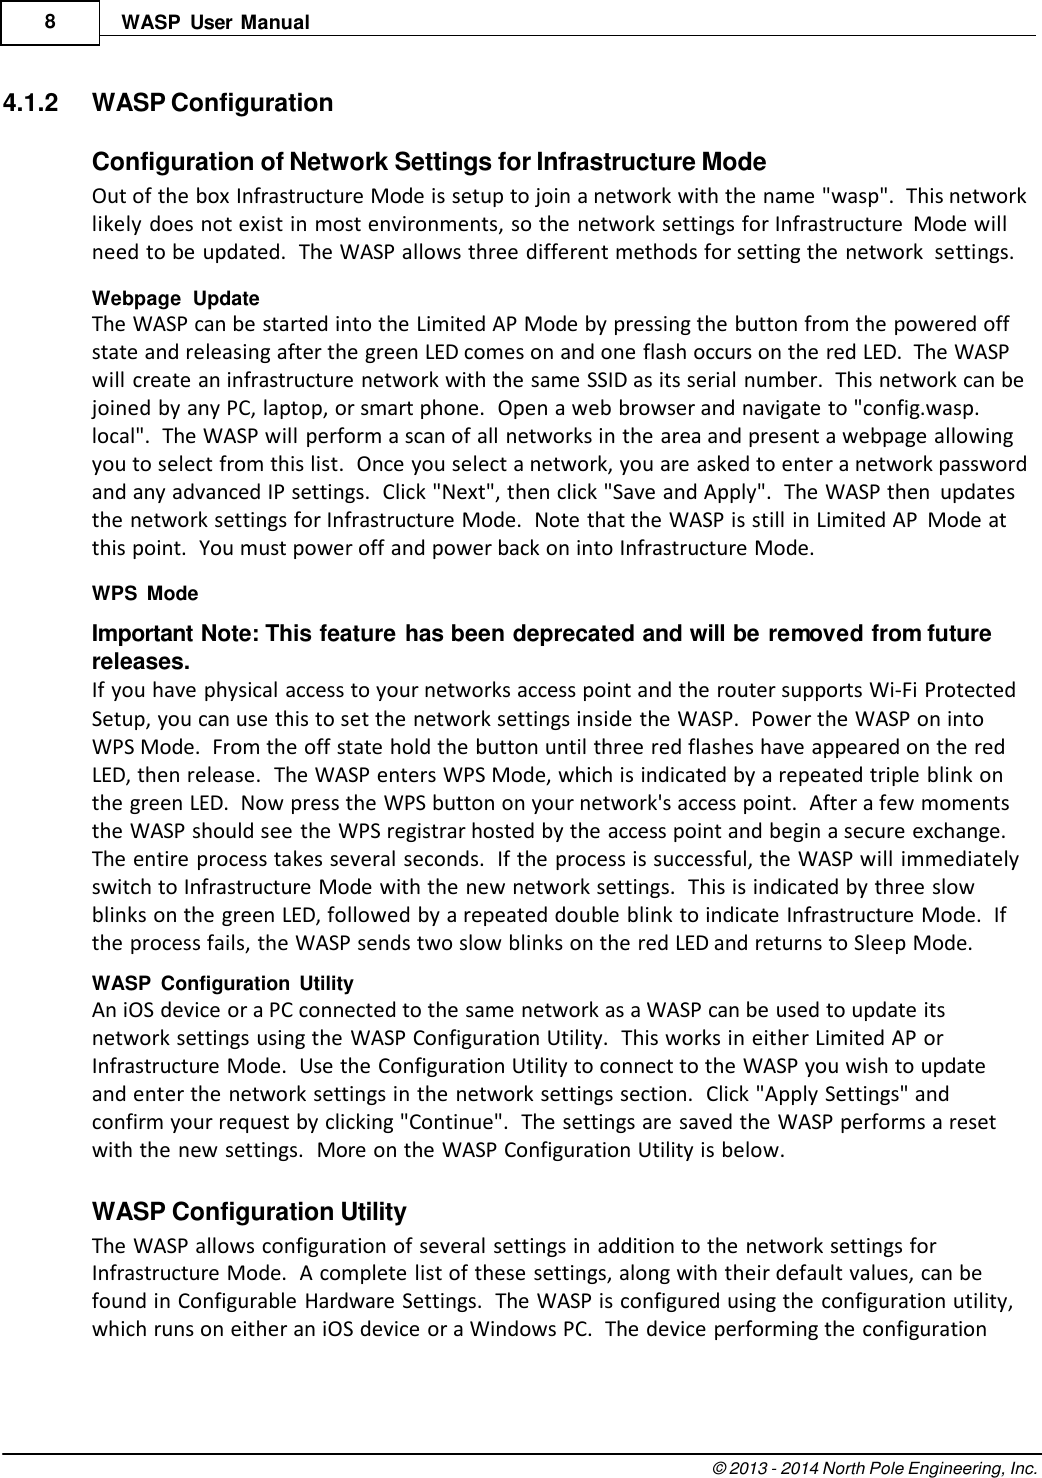 © 2013 - 2014 North Pole Engineering, Inc.    8 WASP  User  Manual   4.1.2  WASP Configuration  Configuration of Network Settings for Infrastructure Mode Out of the box Infrastructure Mode is setup to join a network with the name &quot;wasp&quot;.  This network likely does not exist in most environments, so the network settings for Infrastructure  Mode will need to be updated.  The WASP allows three different methods for setting the network  settings. Webpage  Update The WASP can be started into the Limited AP Mode by pressing the button from the powered off state and releasing after the green LED comes on and one flash occurs on the red LED.  The WASP will create an infrastructure network with the same SSID as its serial number.  This network can be joined by any PC, laptop, or smart phone.  Open a web browser and navigate to &quot;config.wasp. local&quot;.  The WASP will perform a scan of all networks in the area and present a webpage allowing you to select from this list.  Once you select a network, you are asked to enter a network password and any advanced IP settings.  Click &quot;Next&quot;, then click &quot;Save and Apply&quot;.  The WASP then  updates the network settings for Infrastructure Mode.  Note that the WASP is still in Limited AP  Mode at this point.  You must power off and power back on into Infrastructure Mode. WPS  Mode Important Note: This feature has been deprecated and will be removed from future releases. If you have physical access to your networks access point and the router supports Wi-Fi Protected Setup, you can use this to set the network settings inside the WASP.  Power the WASP on into WPS Mode.  From the off state hold the button until three red flashes have appeared on the red LED, then release.  The WASP enters WPS Mode, which is indicated by a repeated triple blink on the green LED.  Now press the WPS button on your network&apos;s access point.  After a few moments the WASP should see the WPS registrar hosted by the access point and begin a secure exchange. The entire process takes several seconds.  If the process is successful, the WASP will immediately switch to Infrastructure Mode with the new network settings.  This is indicated by three slow blinks on the green LED, followed by a repeated double blink to indicate Infrastructure Mode.  If the process fails, the WASP sends two slow blinks on the red LED and returns to Sleep Mode. WASP  Configuration  Utility An iOS device or a PC connected to the same network as a WASP can be used to update its network settings using the WASP Configuration Utility.  This works in either Limited AP or Infrastructure Mode.  Use the Configuration Utility to connect to the WASP you wish to update and enter the network settings in the network settings section.  Click &quot;Apply Settings&quot; and confirm your request by clicking &quot;Continue&quot;.  The settings are saved the WASP performs a reset with the new settings.  More on the WASP Configuration Utility is below.  WASP Configuration Utility The WASP allows configuration of several settings in addition to the network settings for Infrastructure Mode.  A complete list of these settings, along with their default values, can be found in Configurable Hardware Settings.  The WASP is configured using the  configuration utility, which runs on either an iOS device or a Windows PC.  The device performing the configuration 